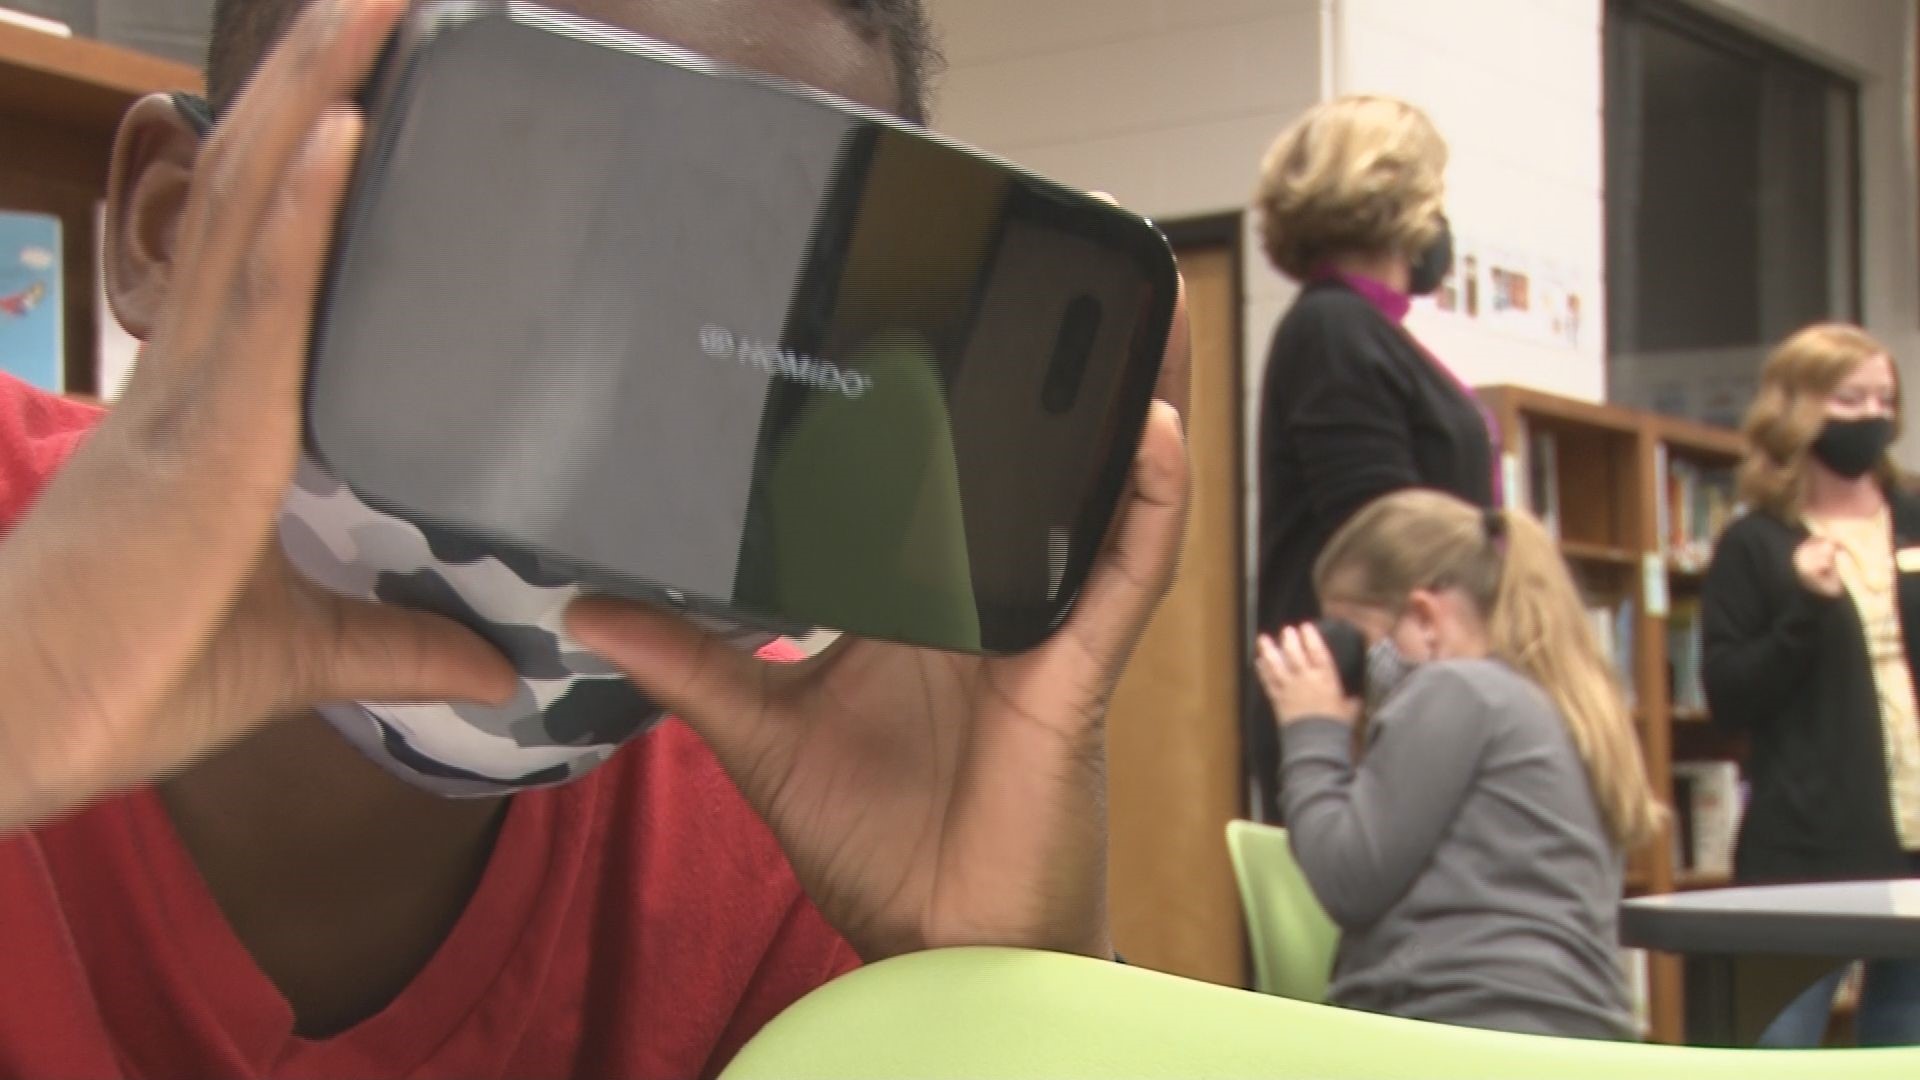 Students get to see sights all over the world and beyond with the school's 3D virtual reality goggles